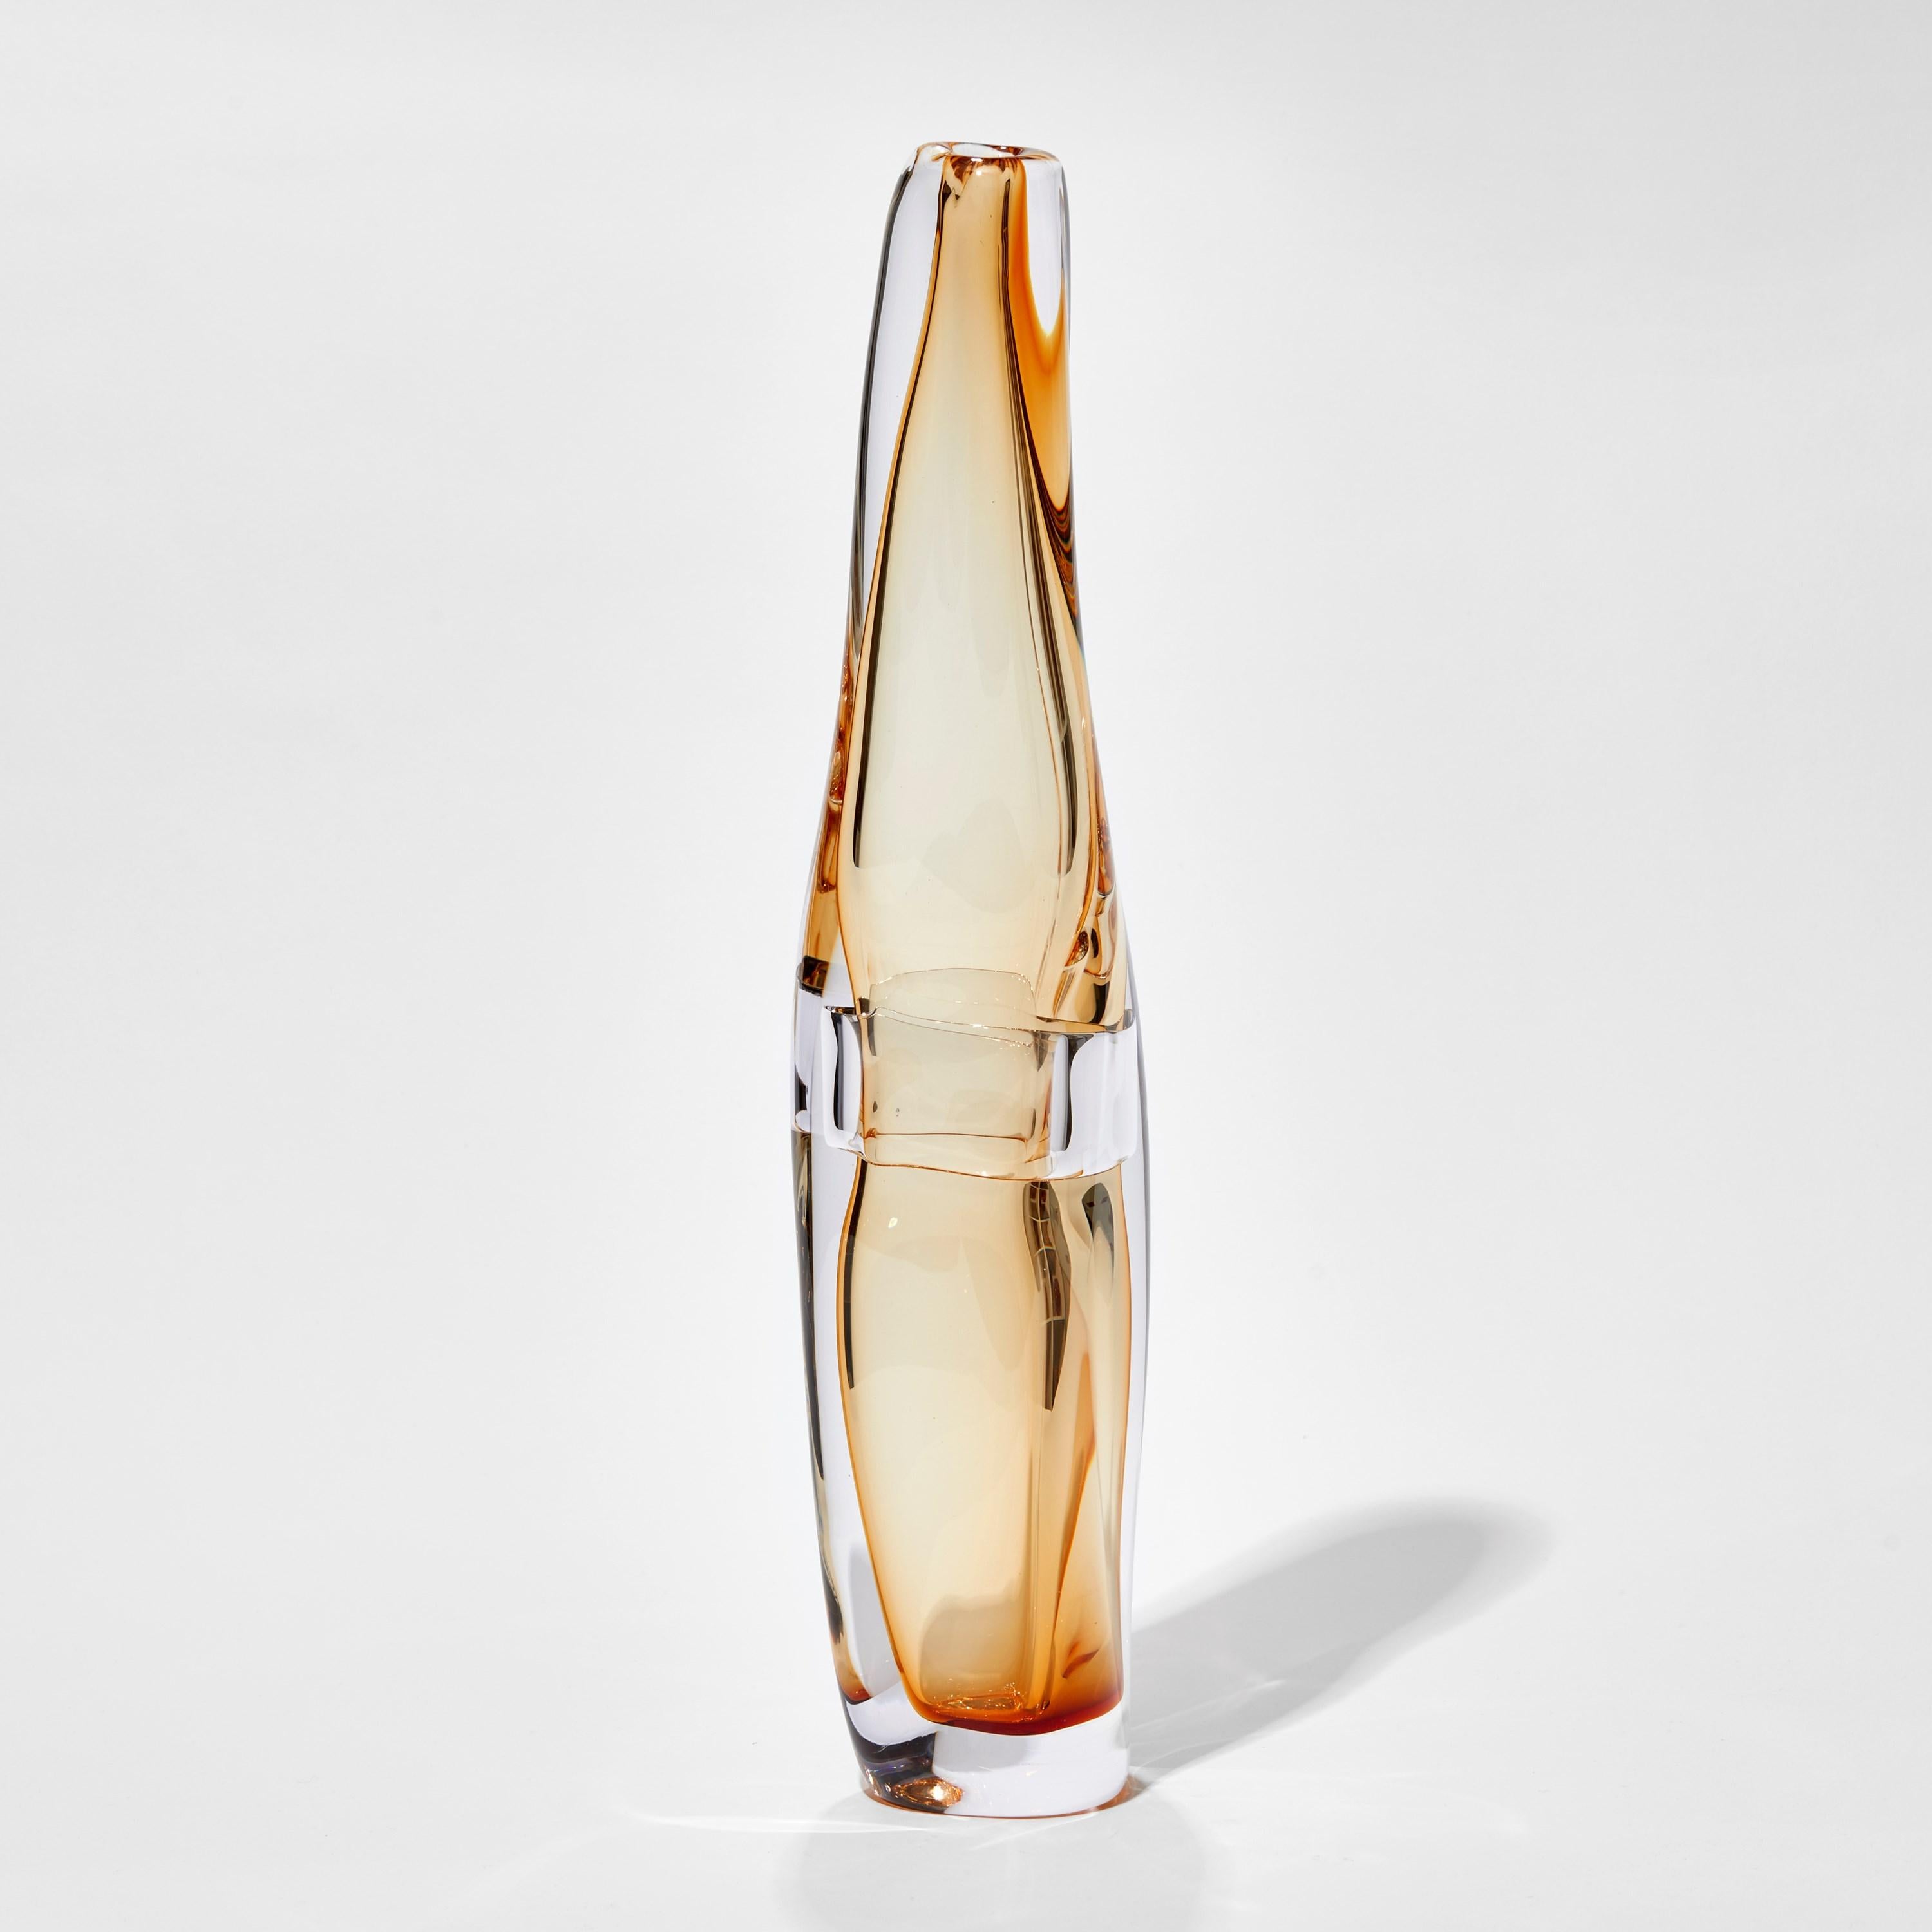 'Sommarial in Whiskey' is a unique handblown sculptural glass vessel by the British artist, Vic Bamforth.

Bamforth is an artist who has helped to bring the highly demanding graal technique into the 21st century. He combines hand-painting and glass